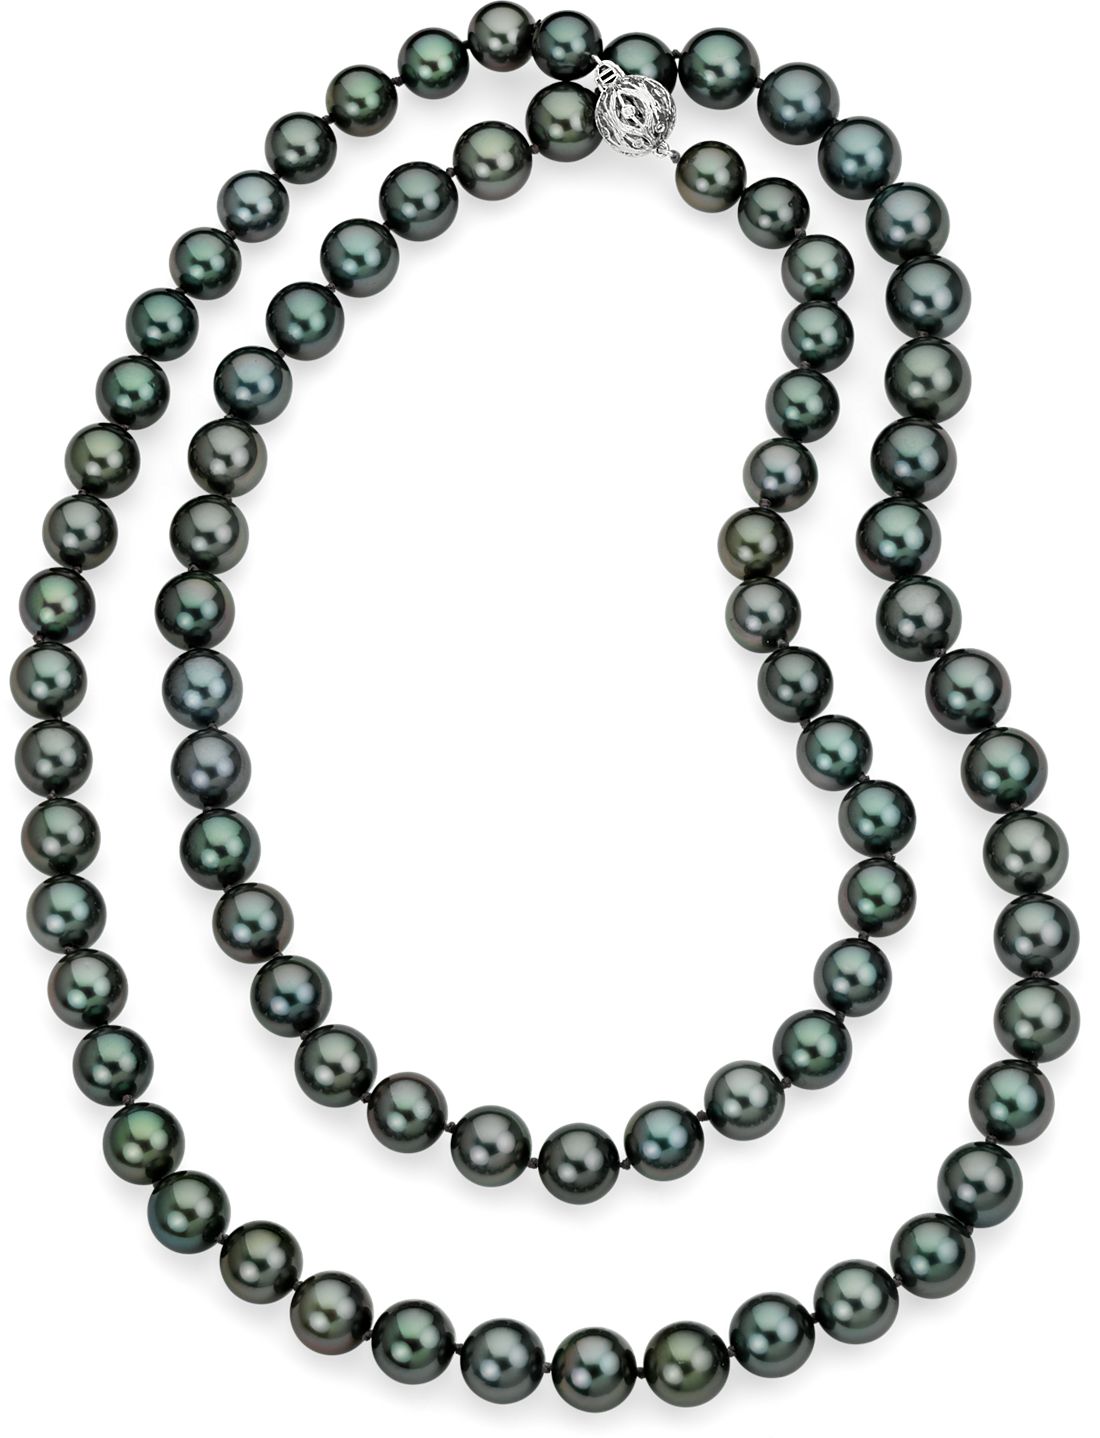 Tahitian Cultured Pearl Strand Necklace with 18k White Gold (36")